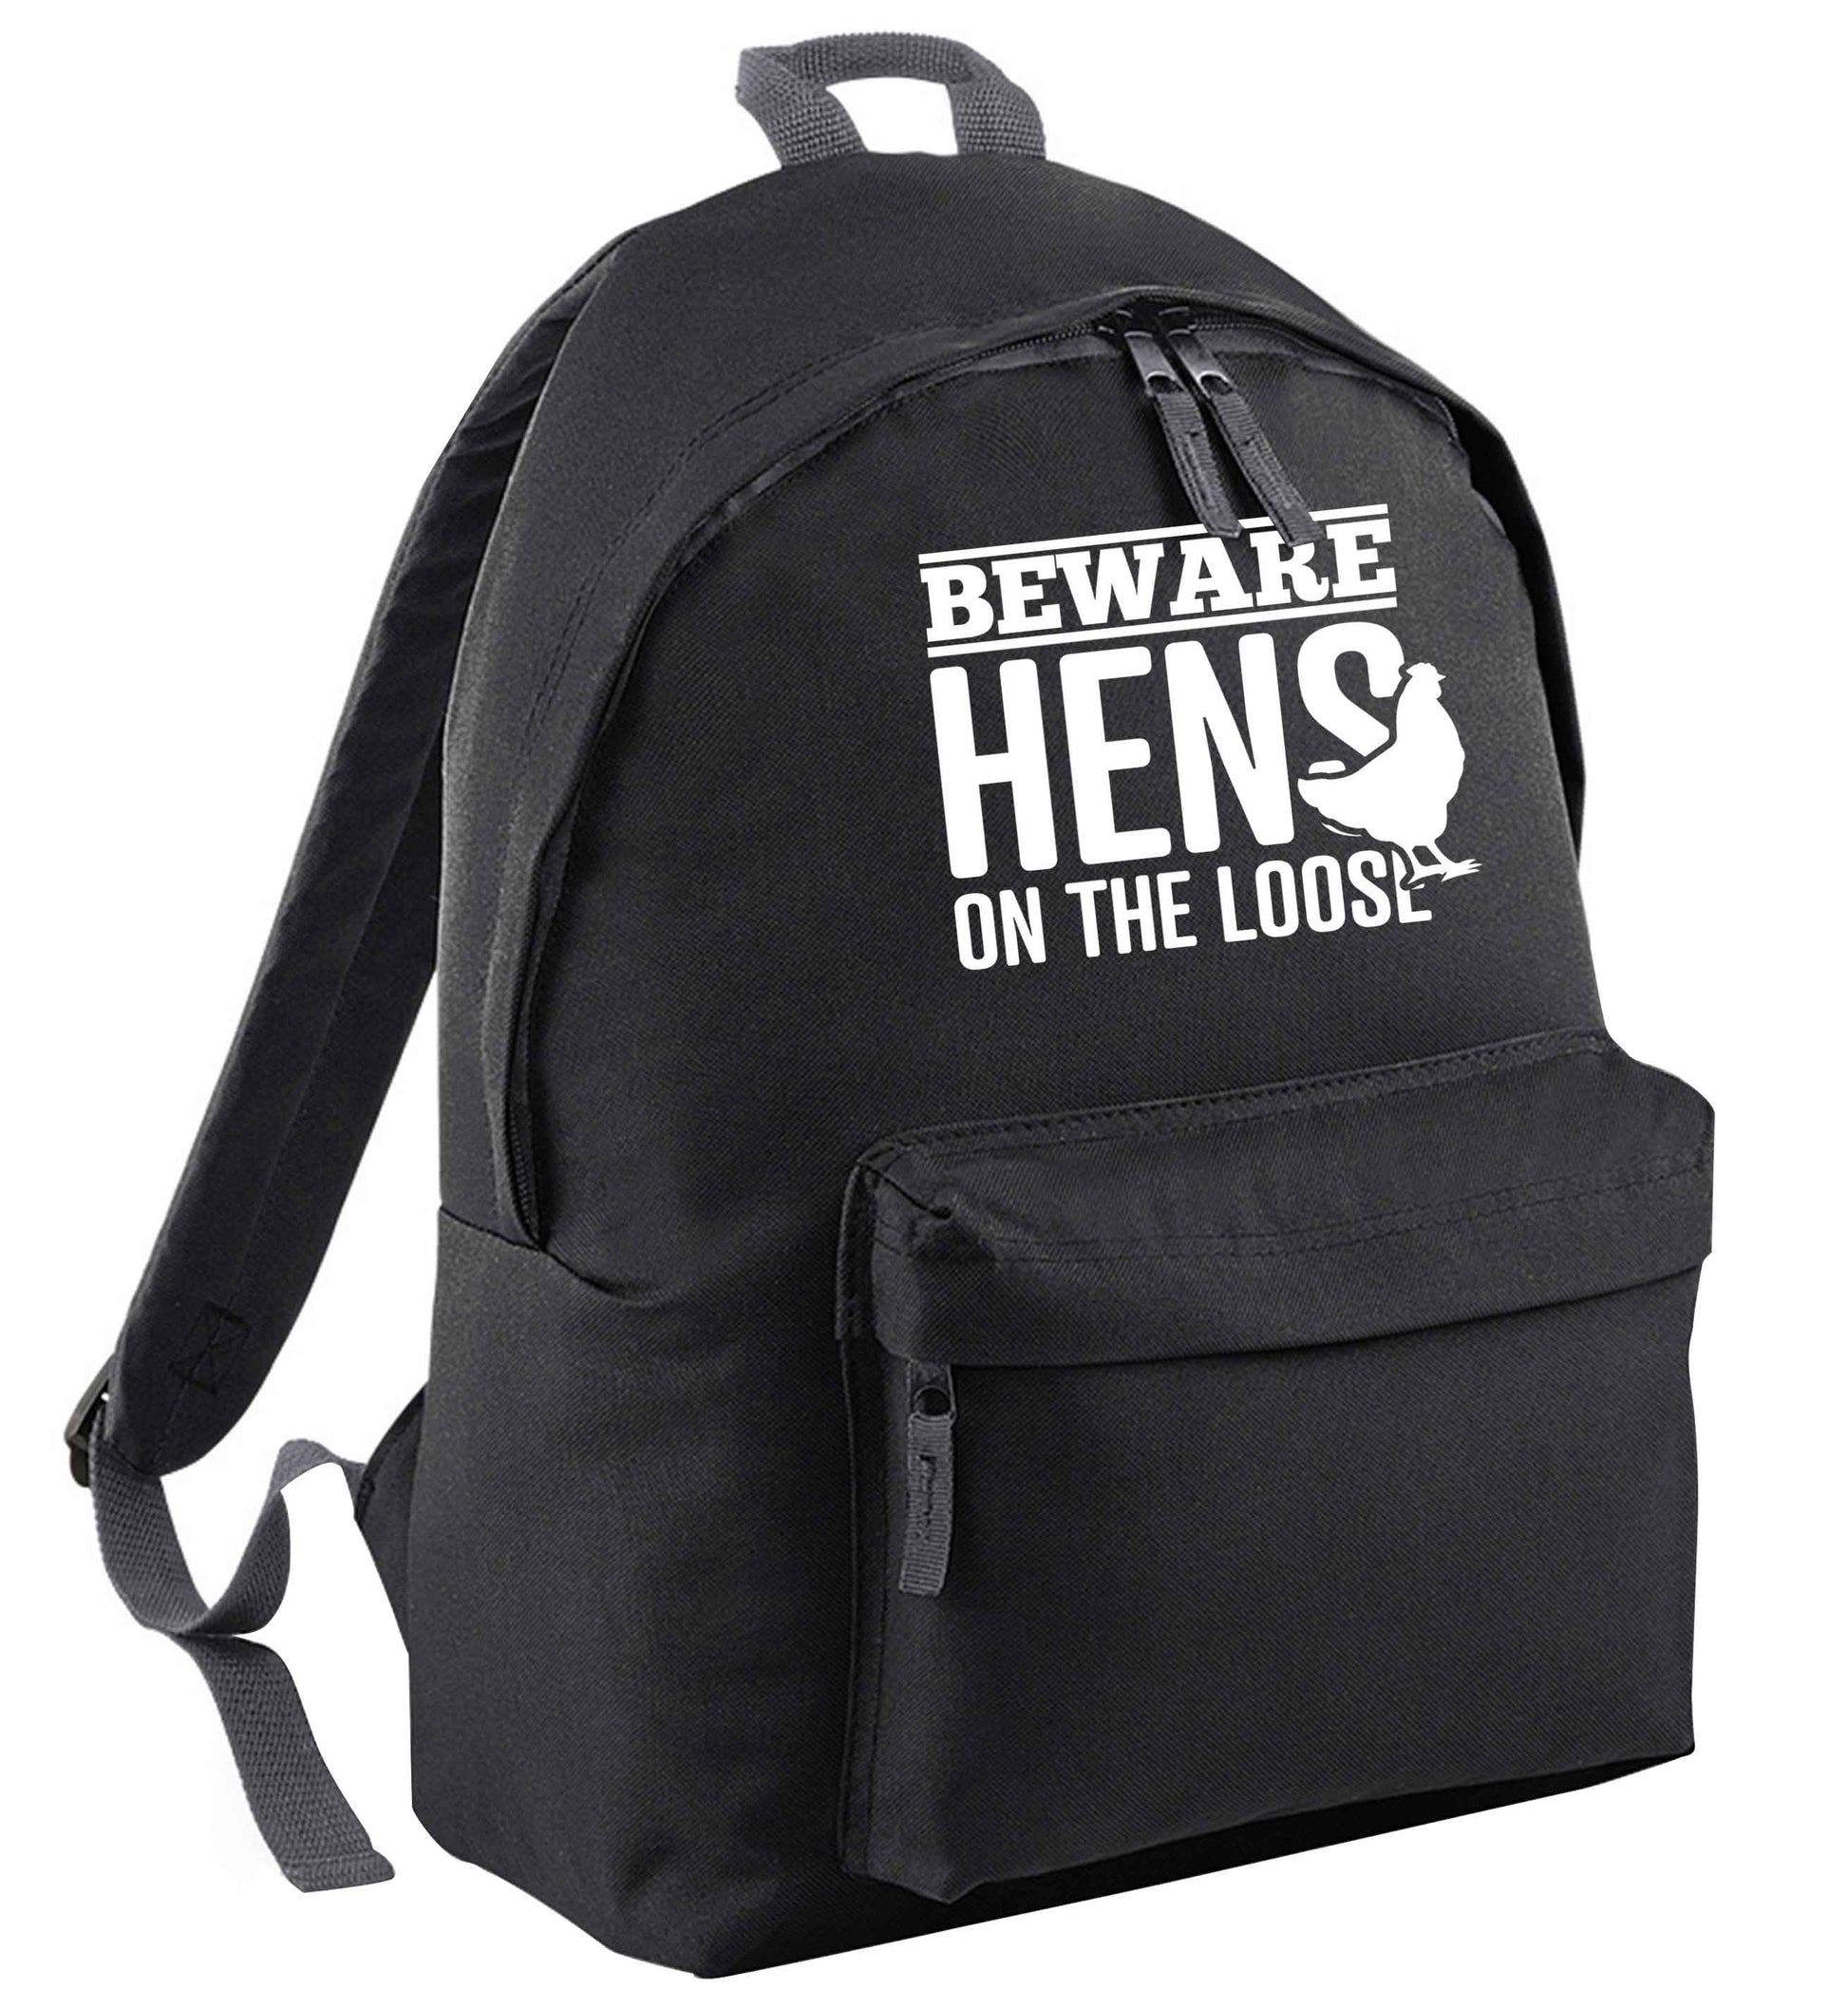 Beware hens on the loose black adults backpack